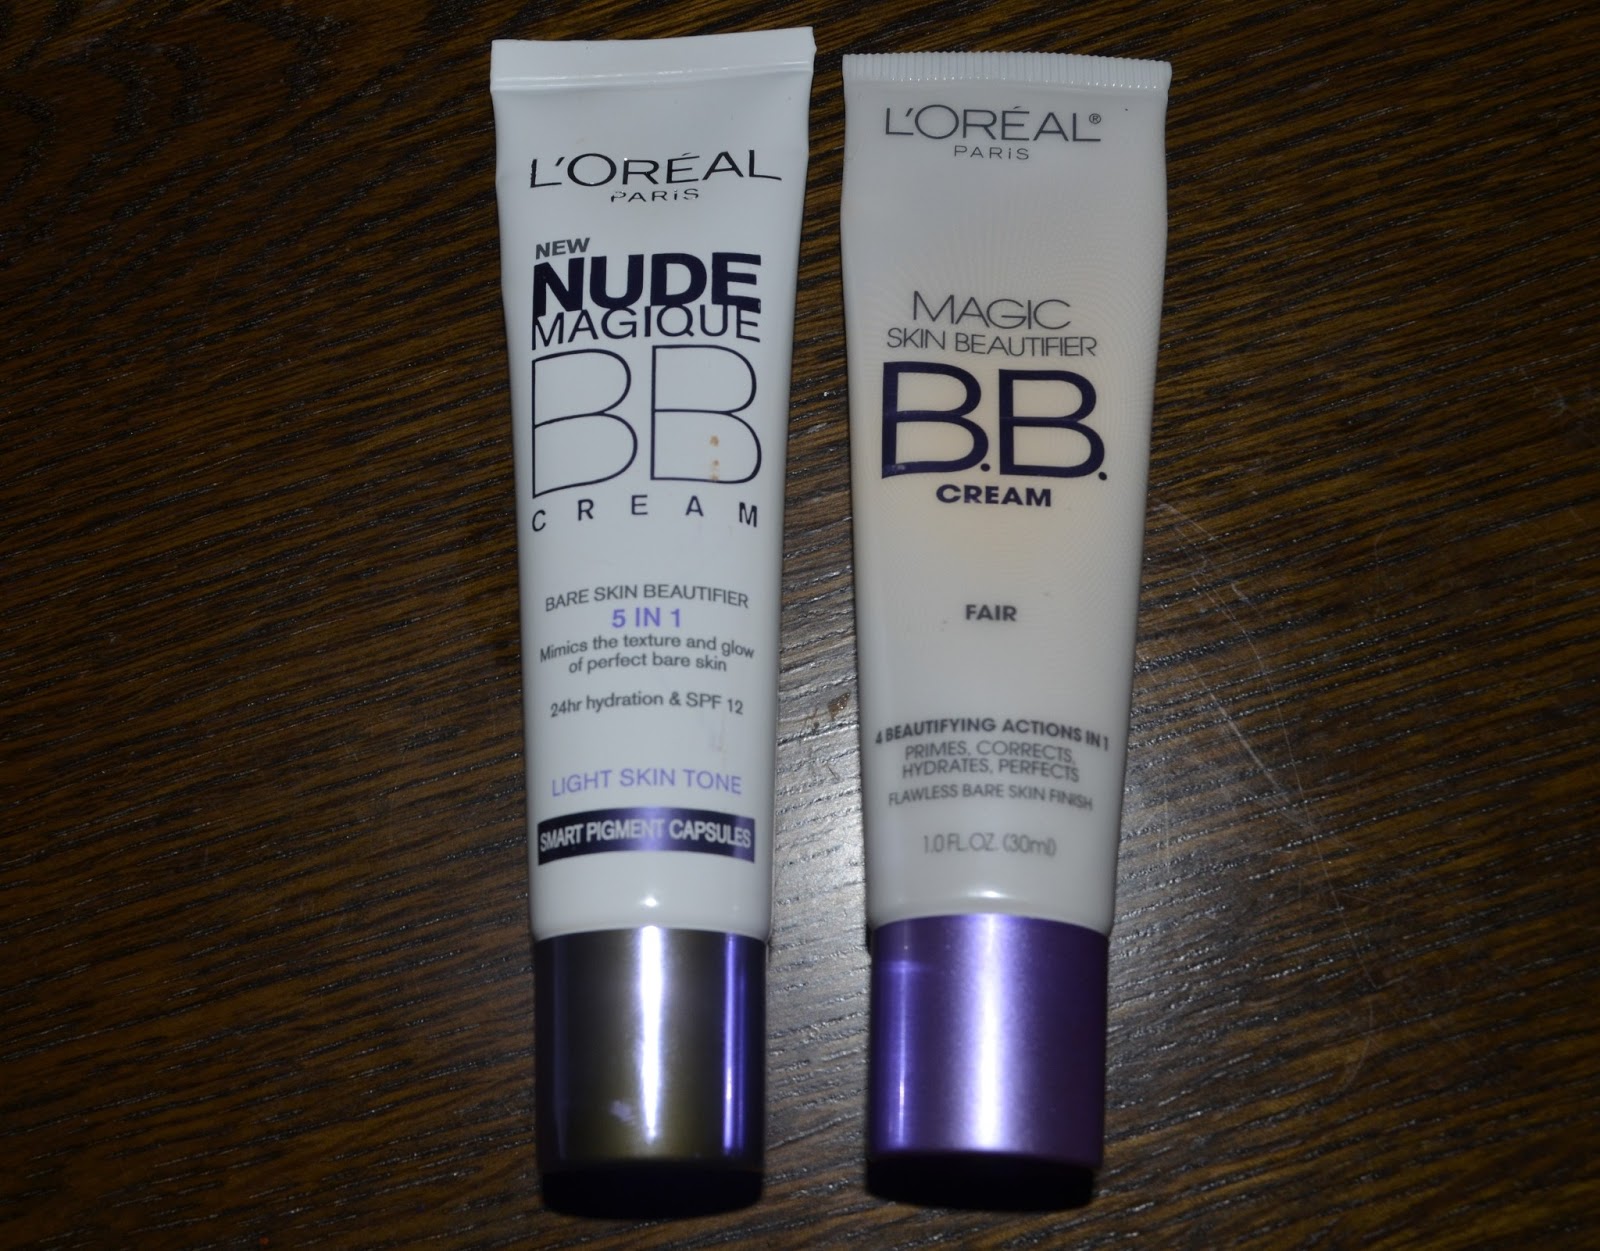 Australian Beauty Review: Review of the Loreal Magique BB Cream